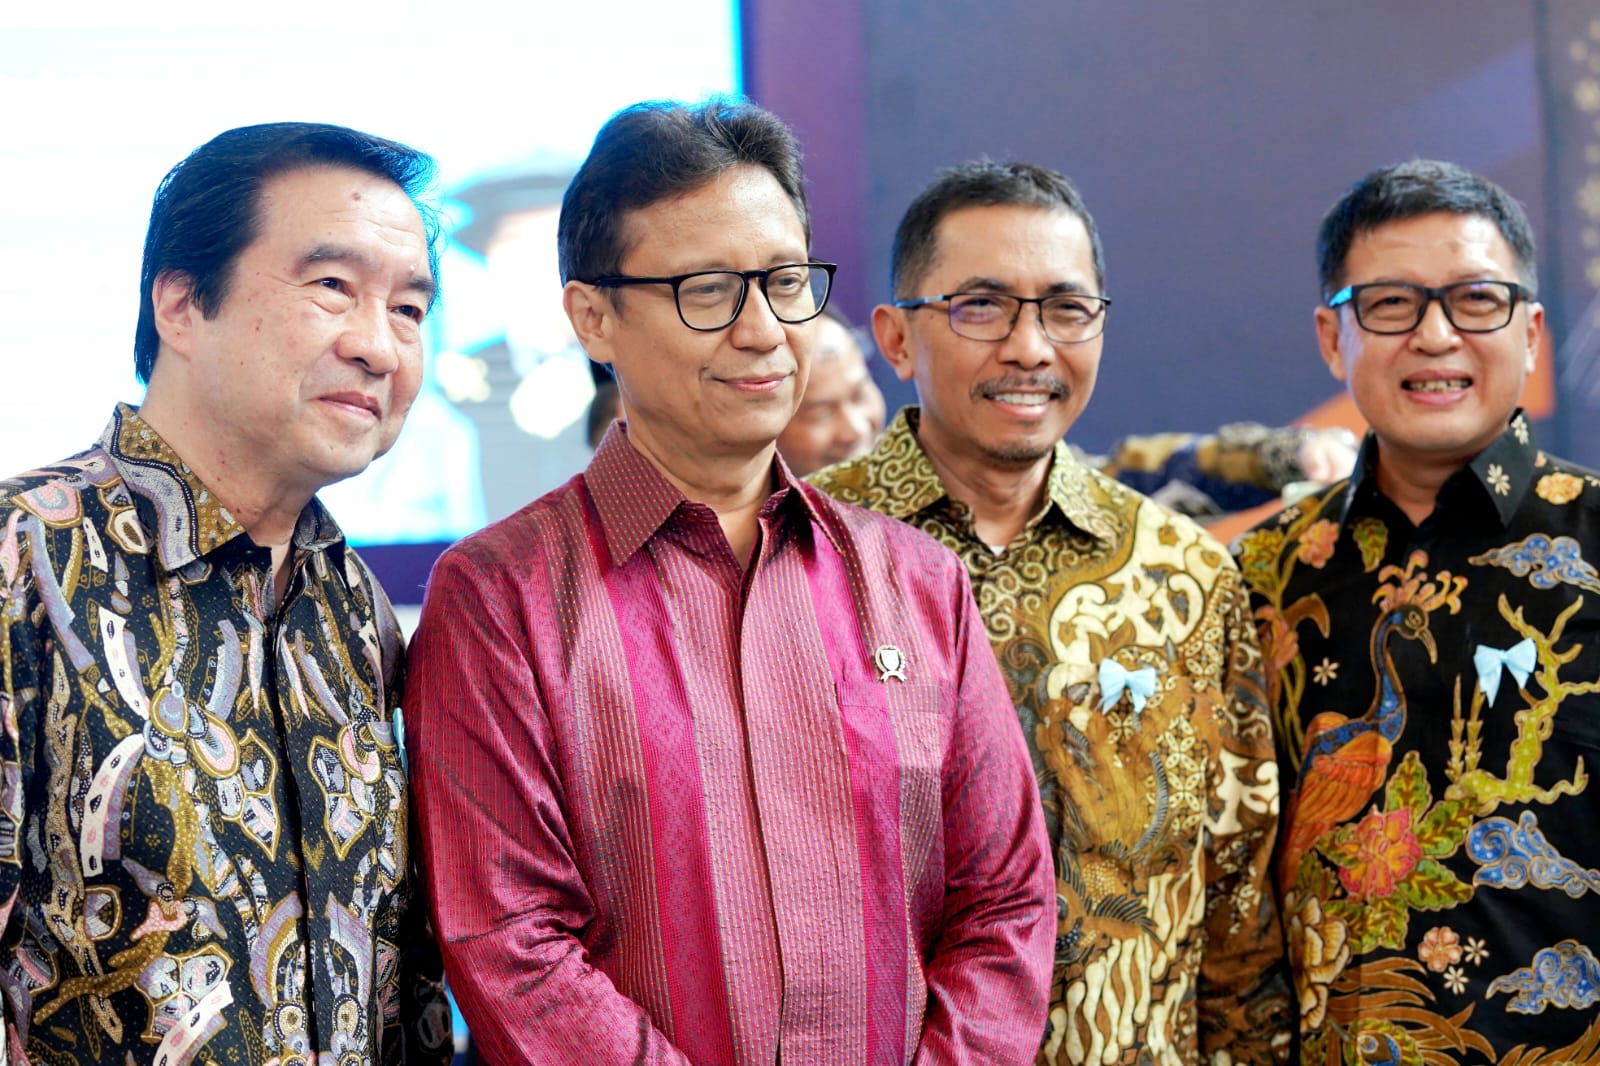 the-minister-of-health-budi-gunadi-attended-the-scientific-oration-of-professors-of-itb